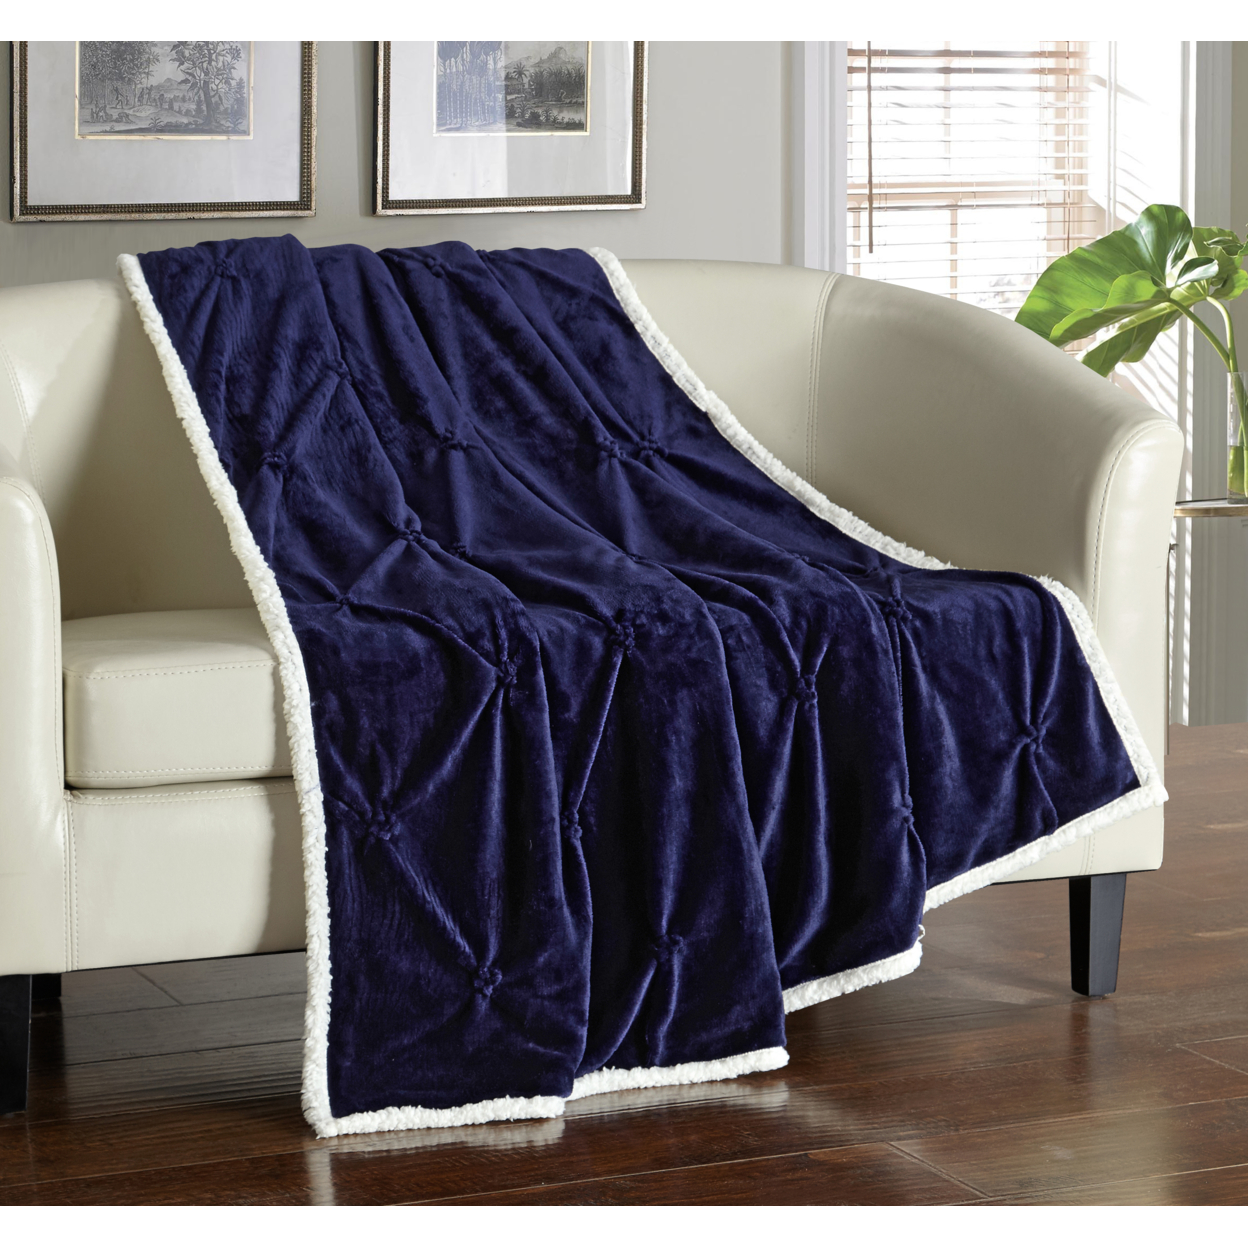 Chic Home Alejandro Throw Blanket Cozy Super Soft Ultra Plush Micromink Sherpa Backing Grey 50X60 - Navy